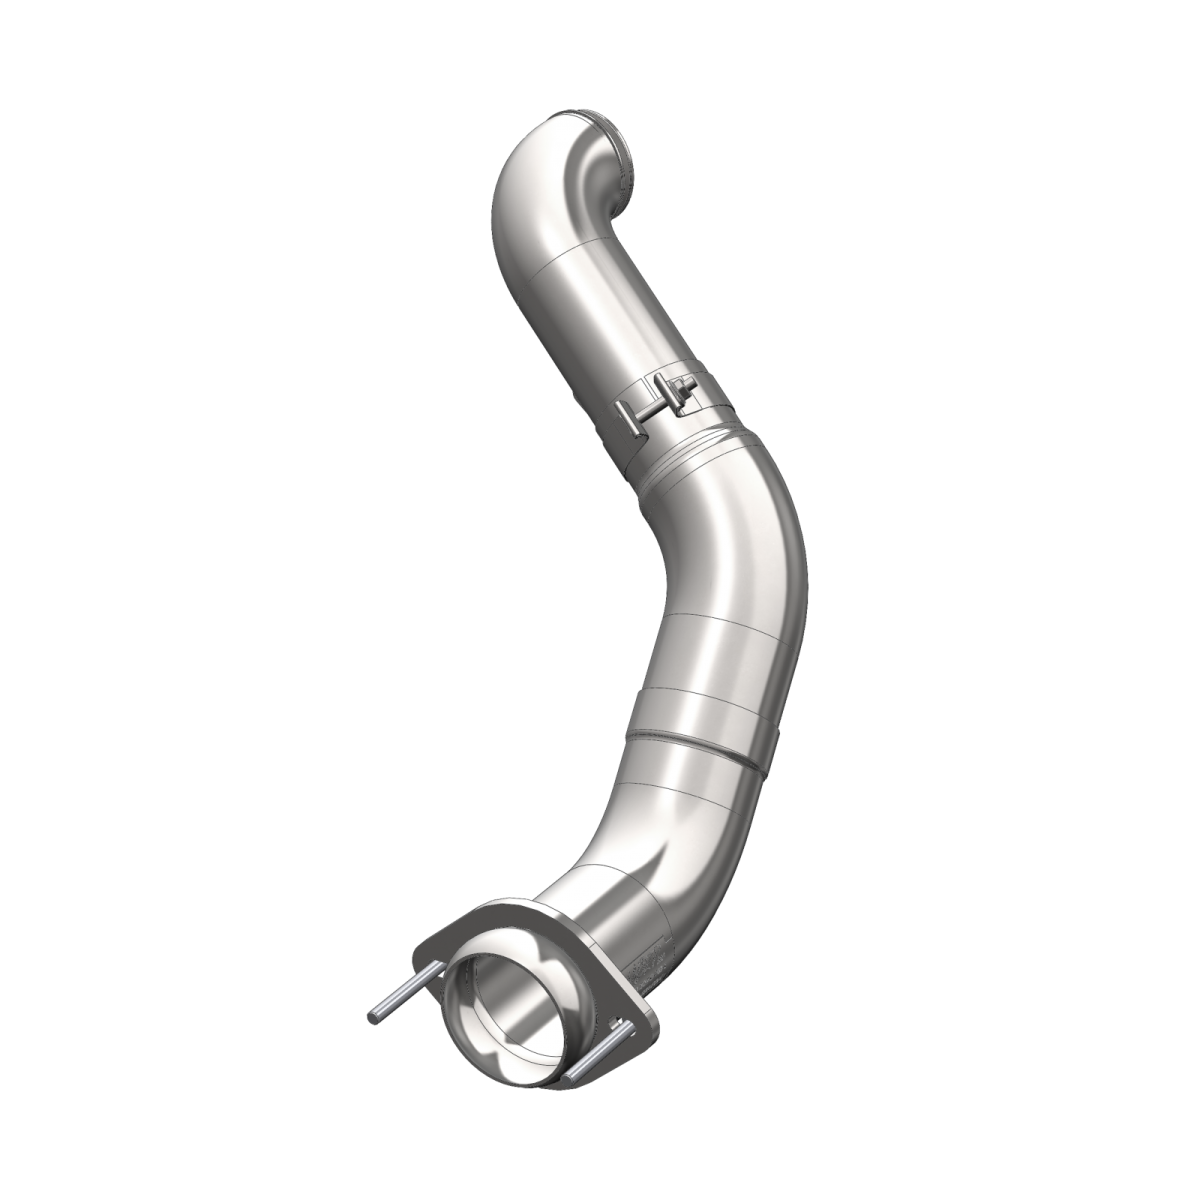 MBRP - MBRP 4 Inch Turbo Down Pipe For 11-15 Ford 6.7L Powerstroke Aluminized Steel EO Num. D-763-1 FALCA459